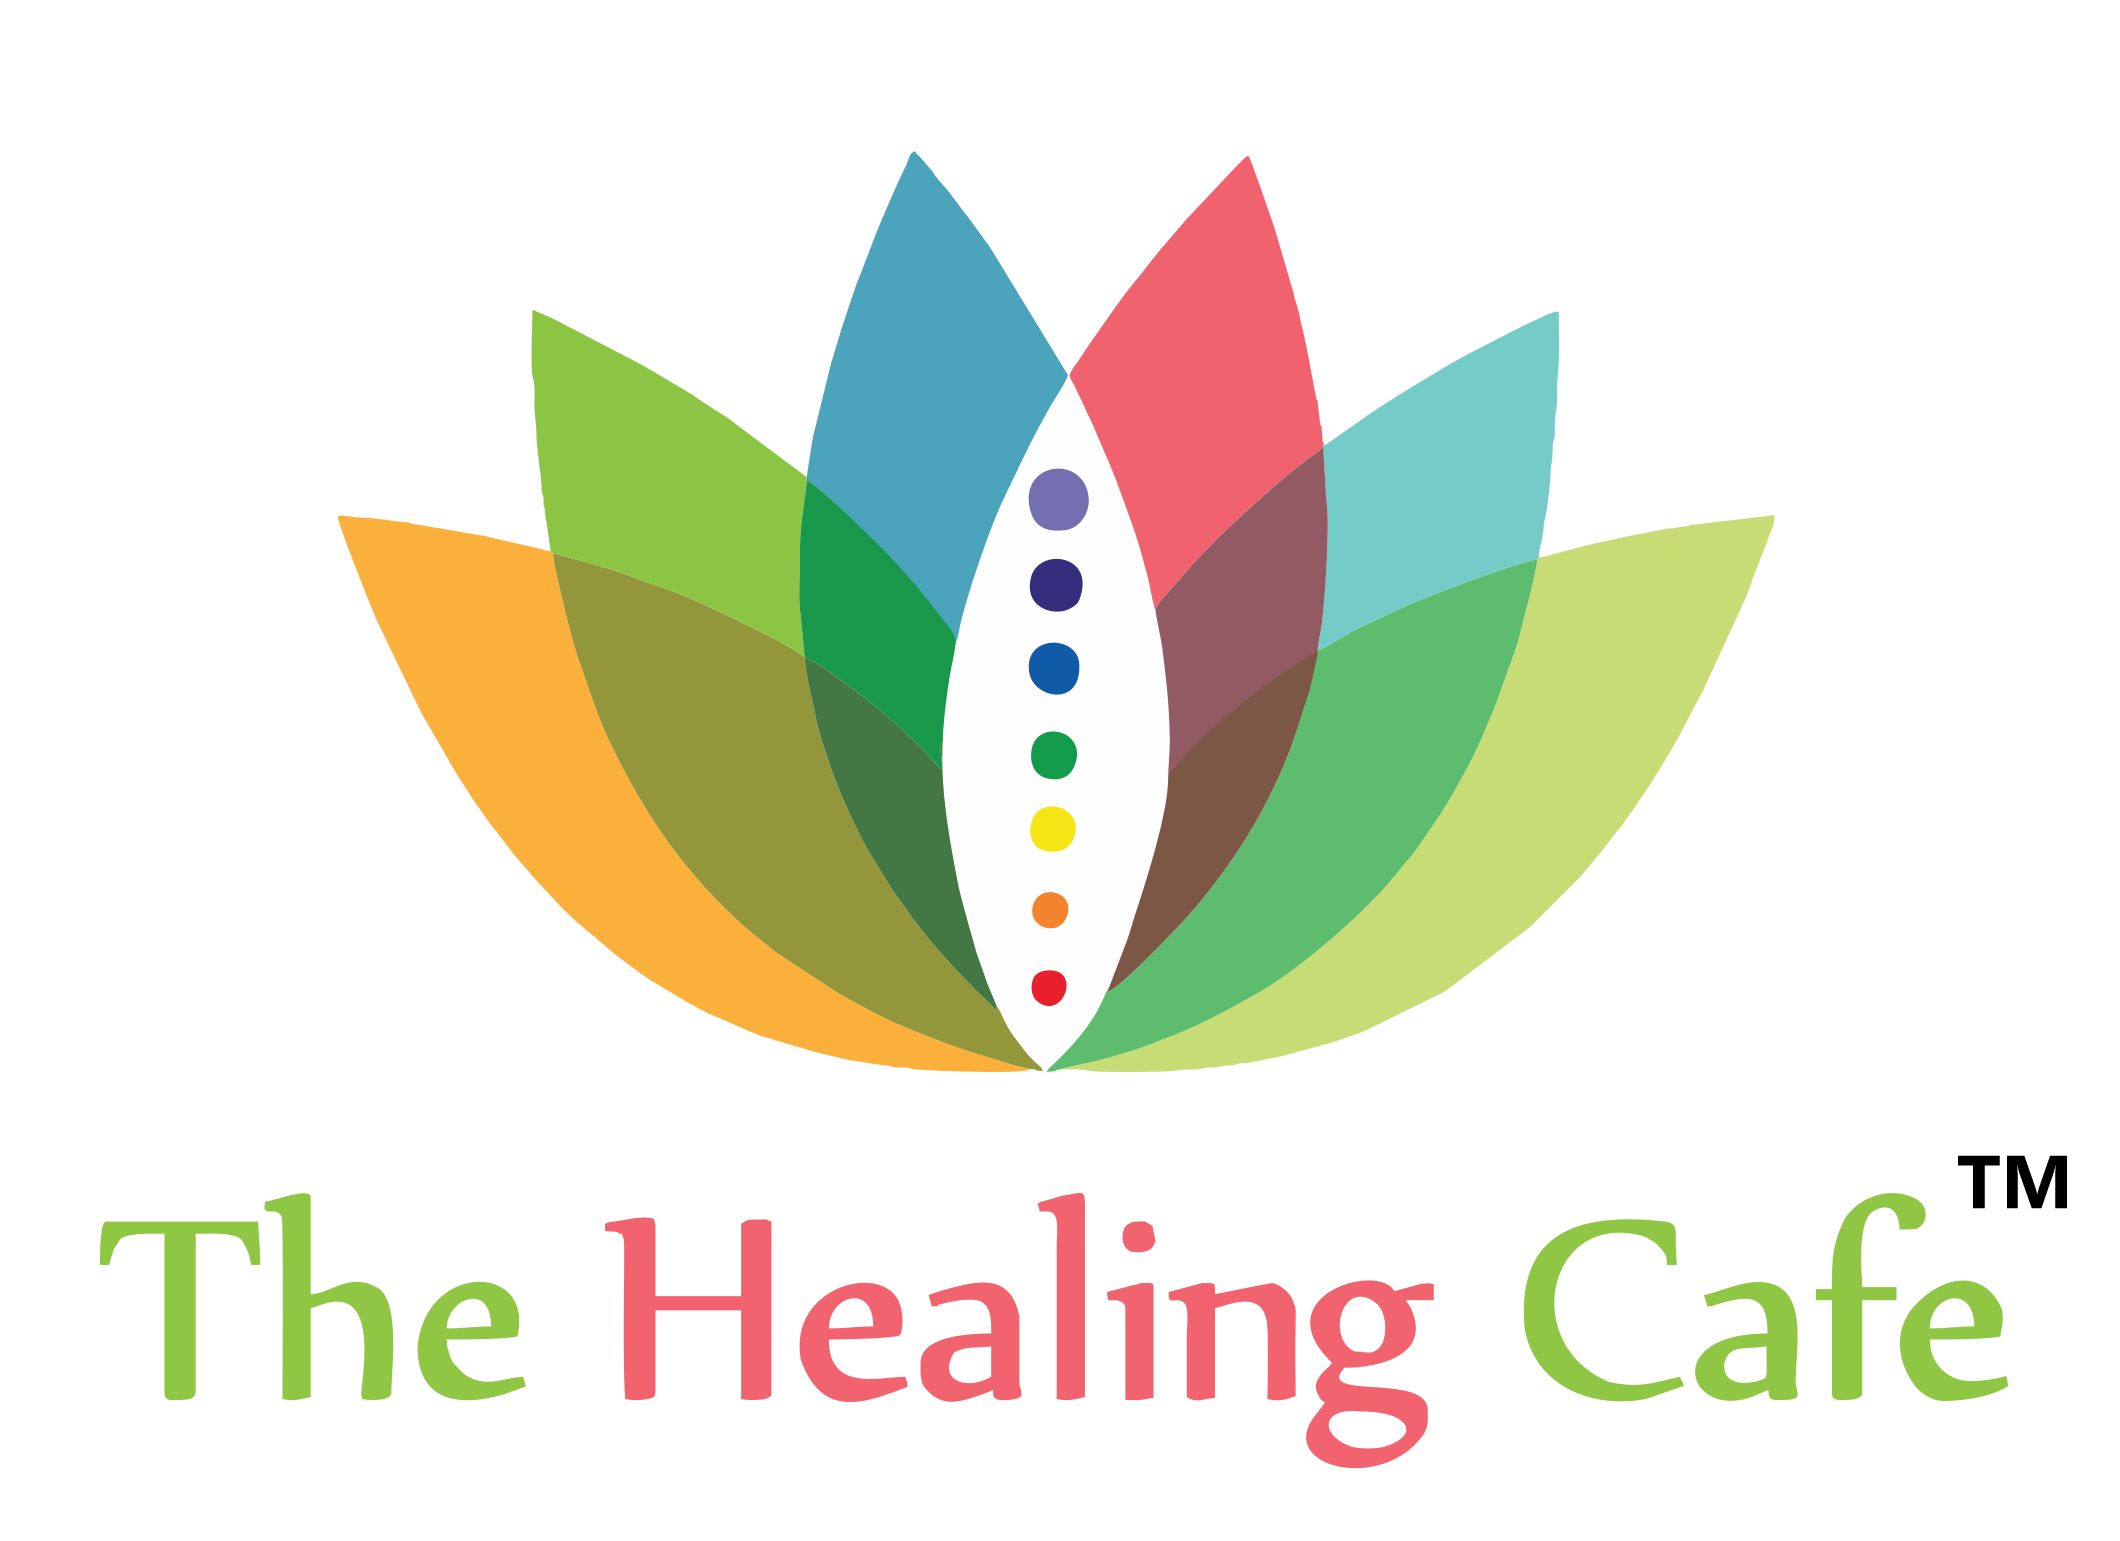 The Healing Cafe